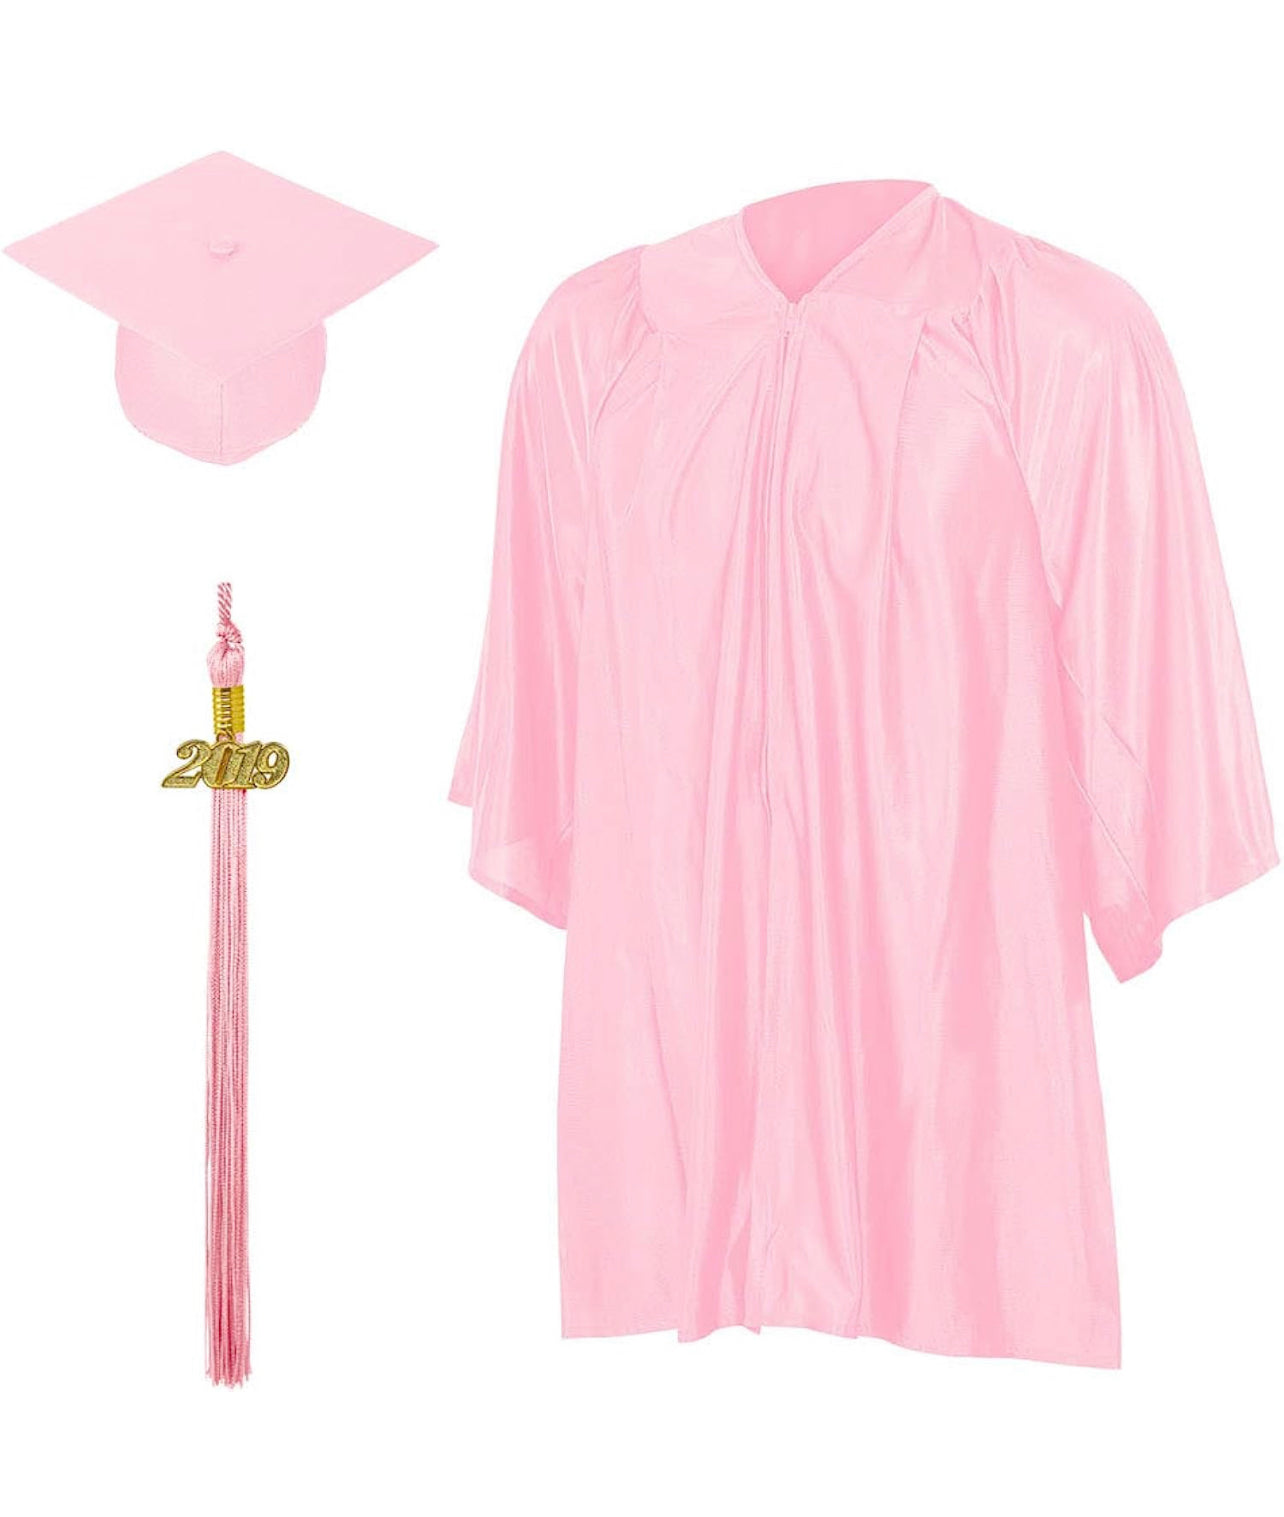 The JD doctoral gown and JD hood by Caps and Gowns Direct